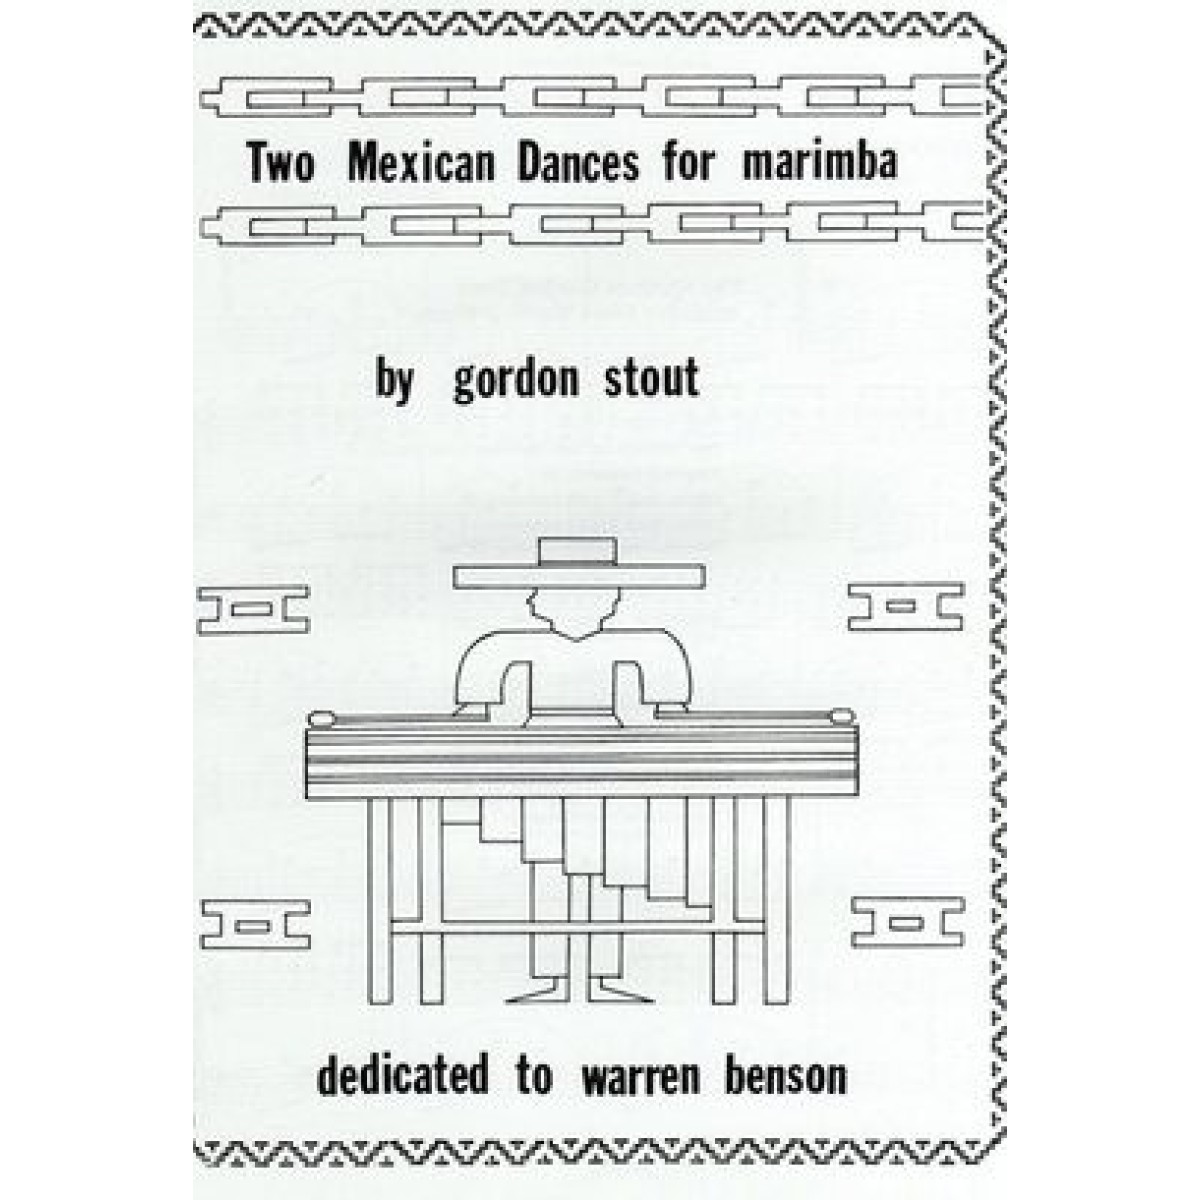 Two Mexican Dances For Marimba